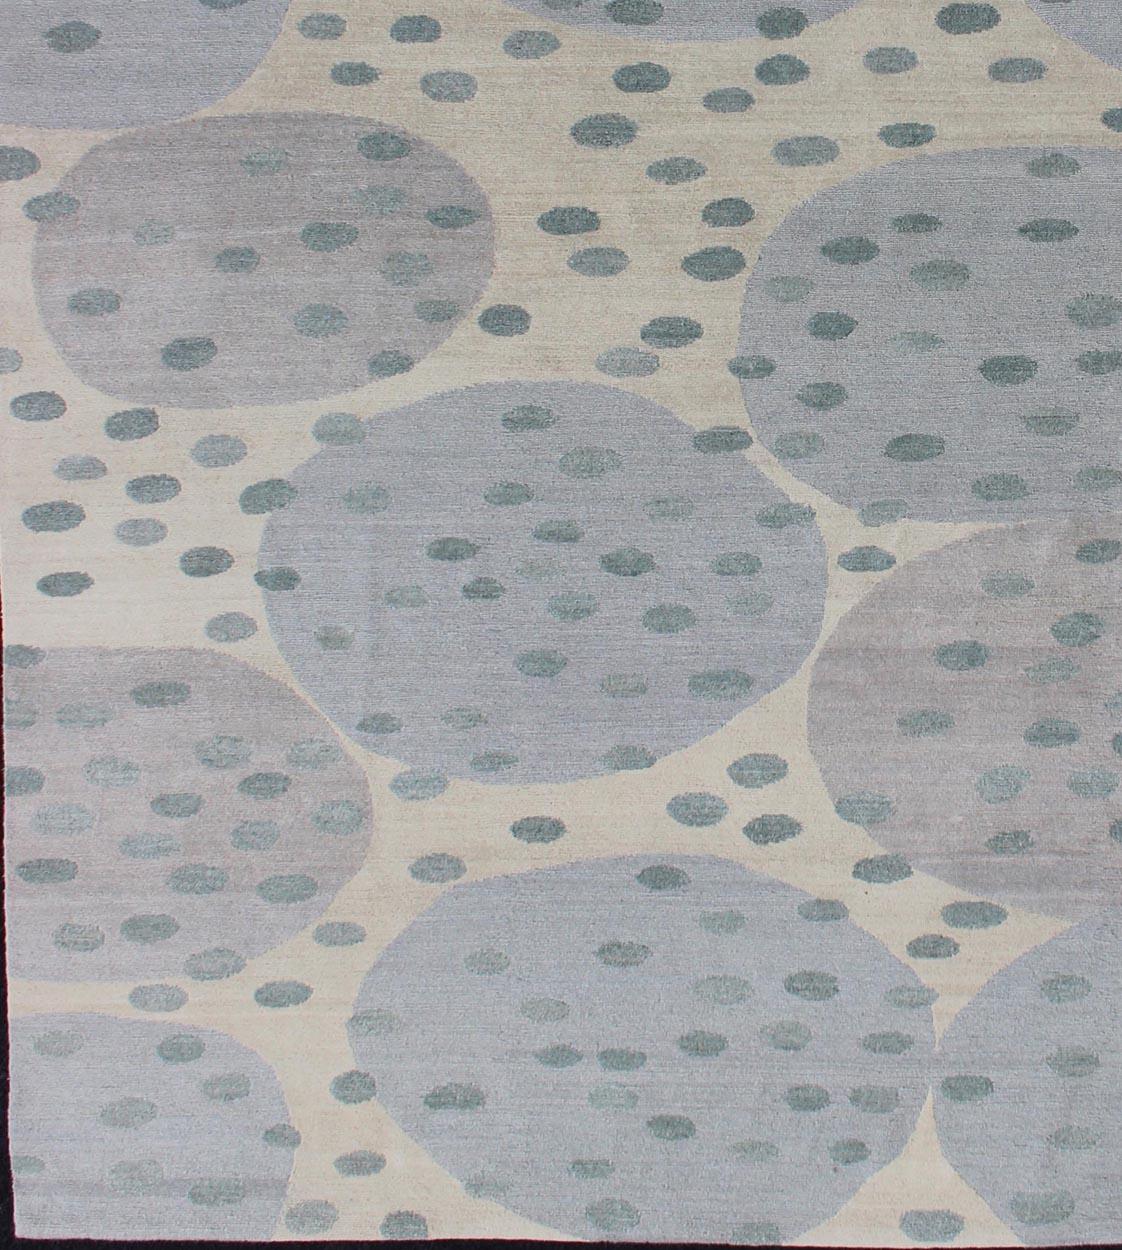 Modern Rug of Wool and Silk From Nepal by Keivan Woven Arts.
Measures: 8' x 10'.
This rug from Nepal was woven with wool and silk and features a modern design of various circles and dots.

Nepalese Modern rug in light tones, Keivan Woven Arts / rug